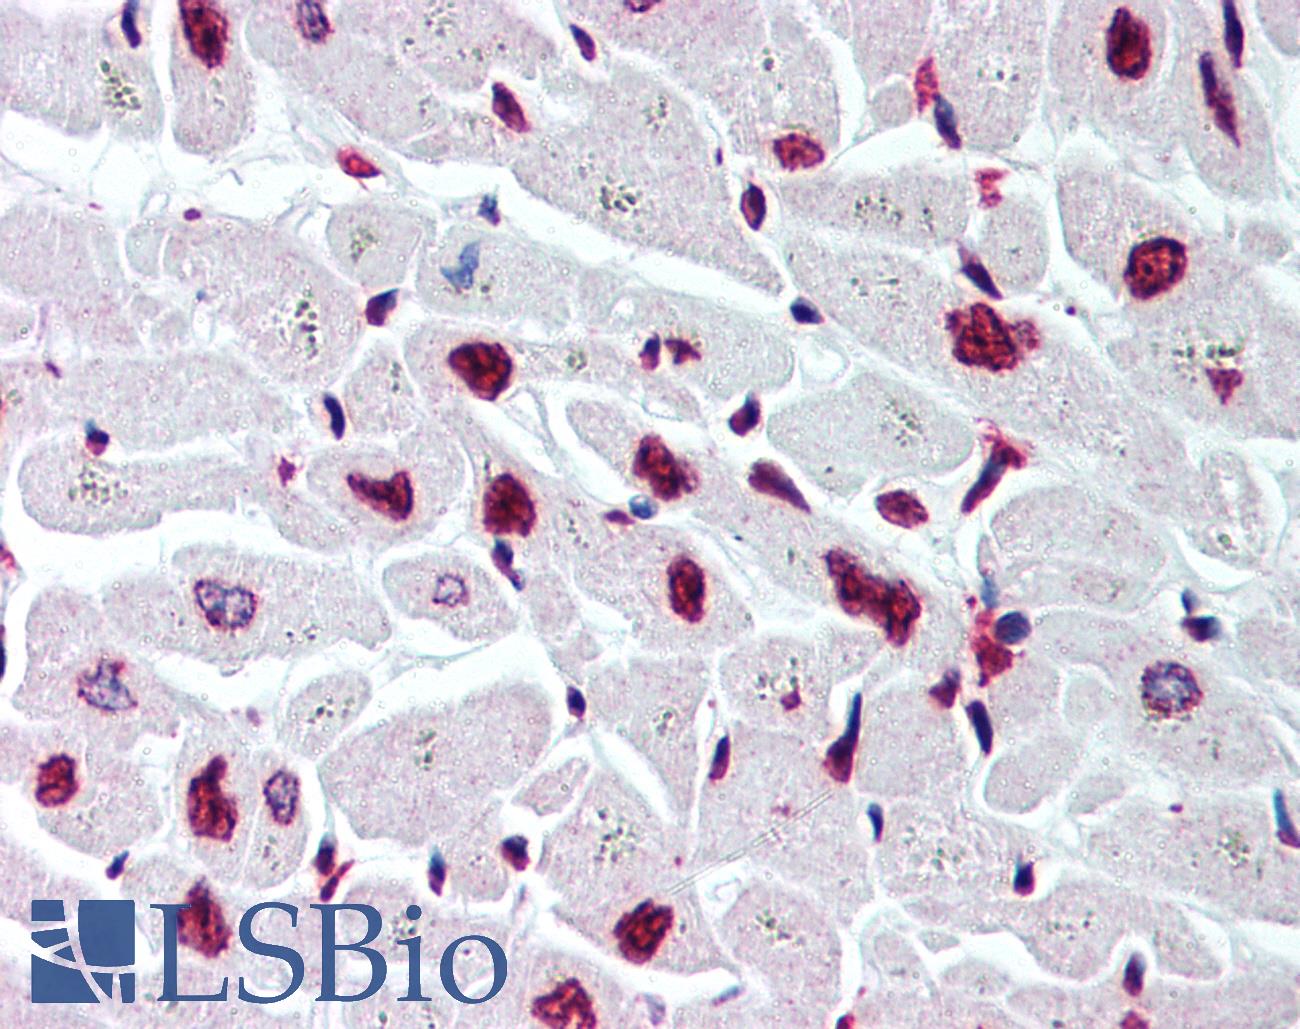 Histone H2B Antibody - Anti-Histone H2B antibody IHC of human heart. Immunohistochemistry of formalin-fixed, paraffin-embedded tissue after heat-induced antigen retrieval. Antibody concentration 5 ug/ml.